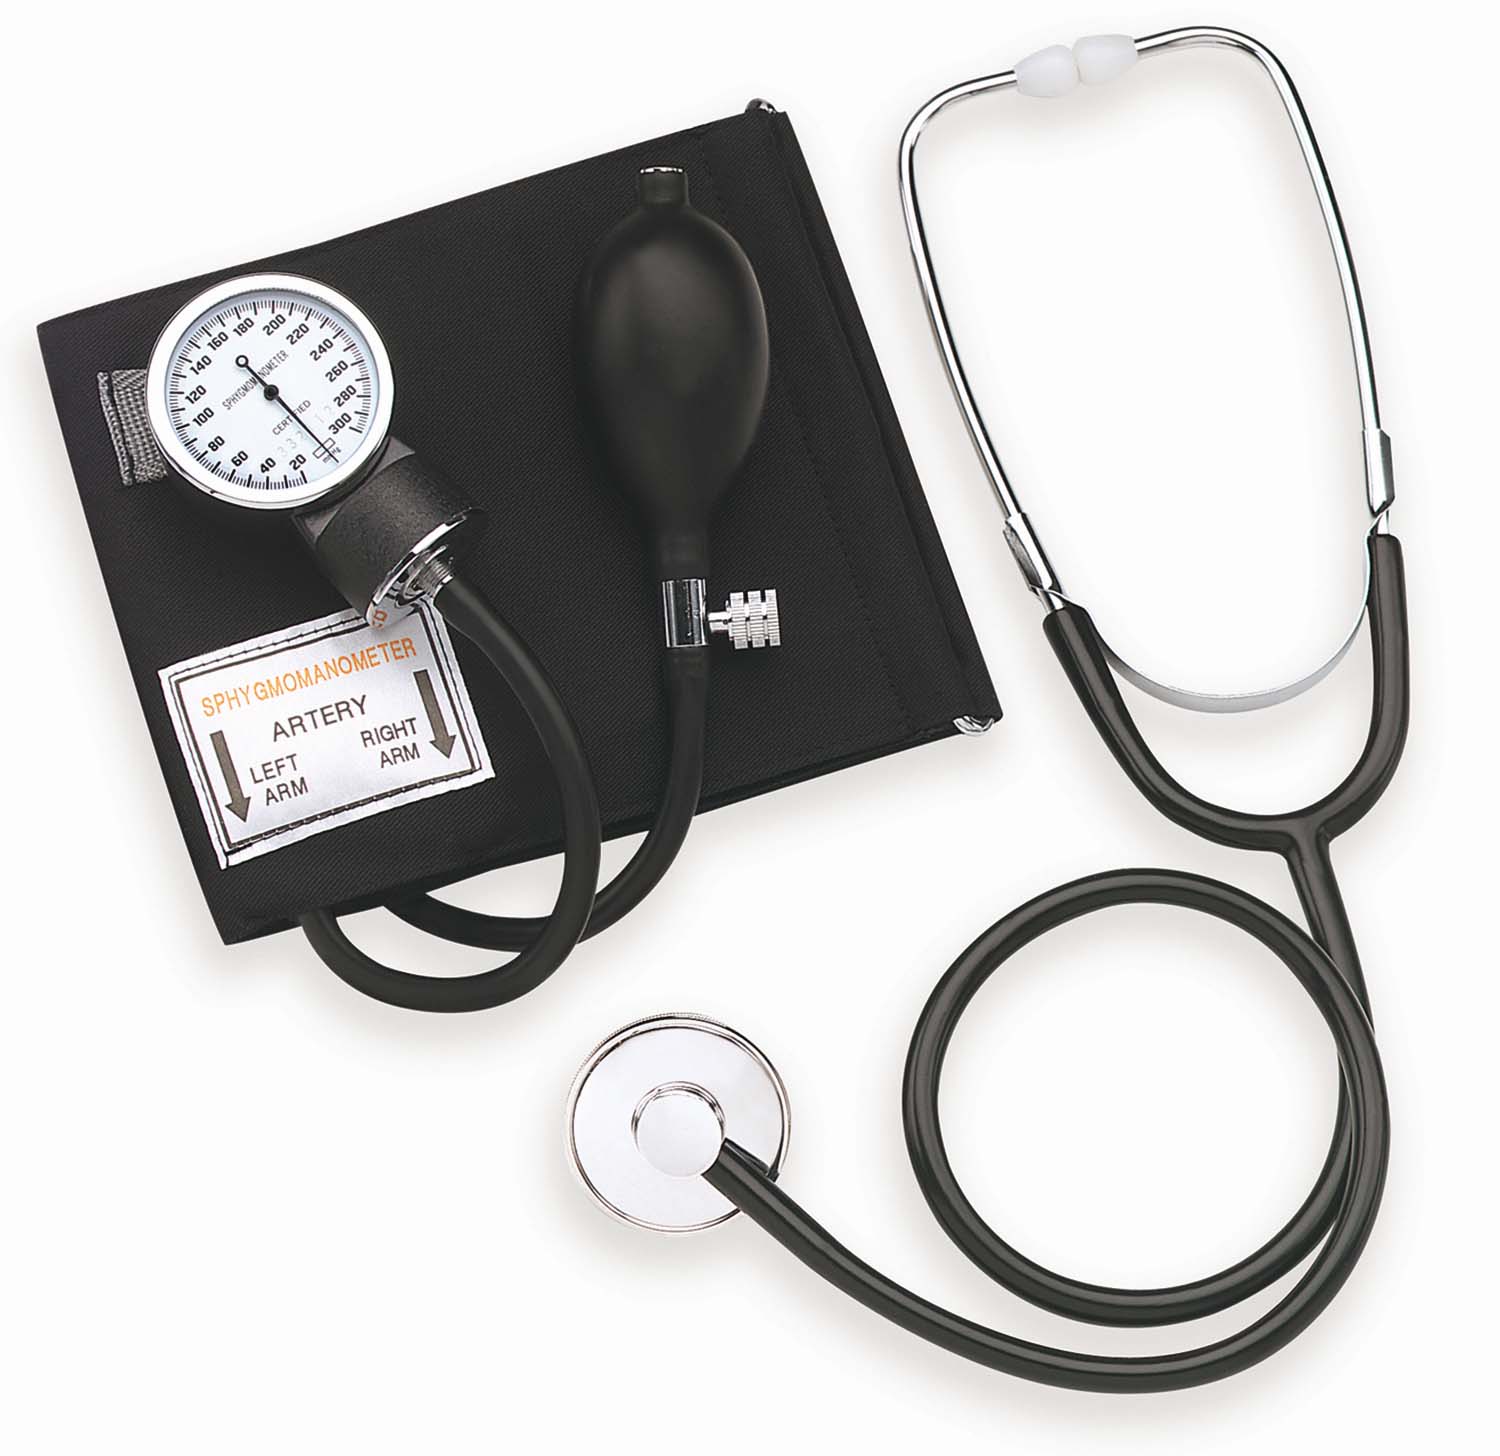 two-party-home-blood-pressure-kit-adult-04-176-021-lr.jpg